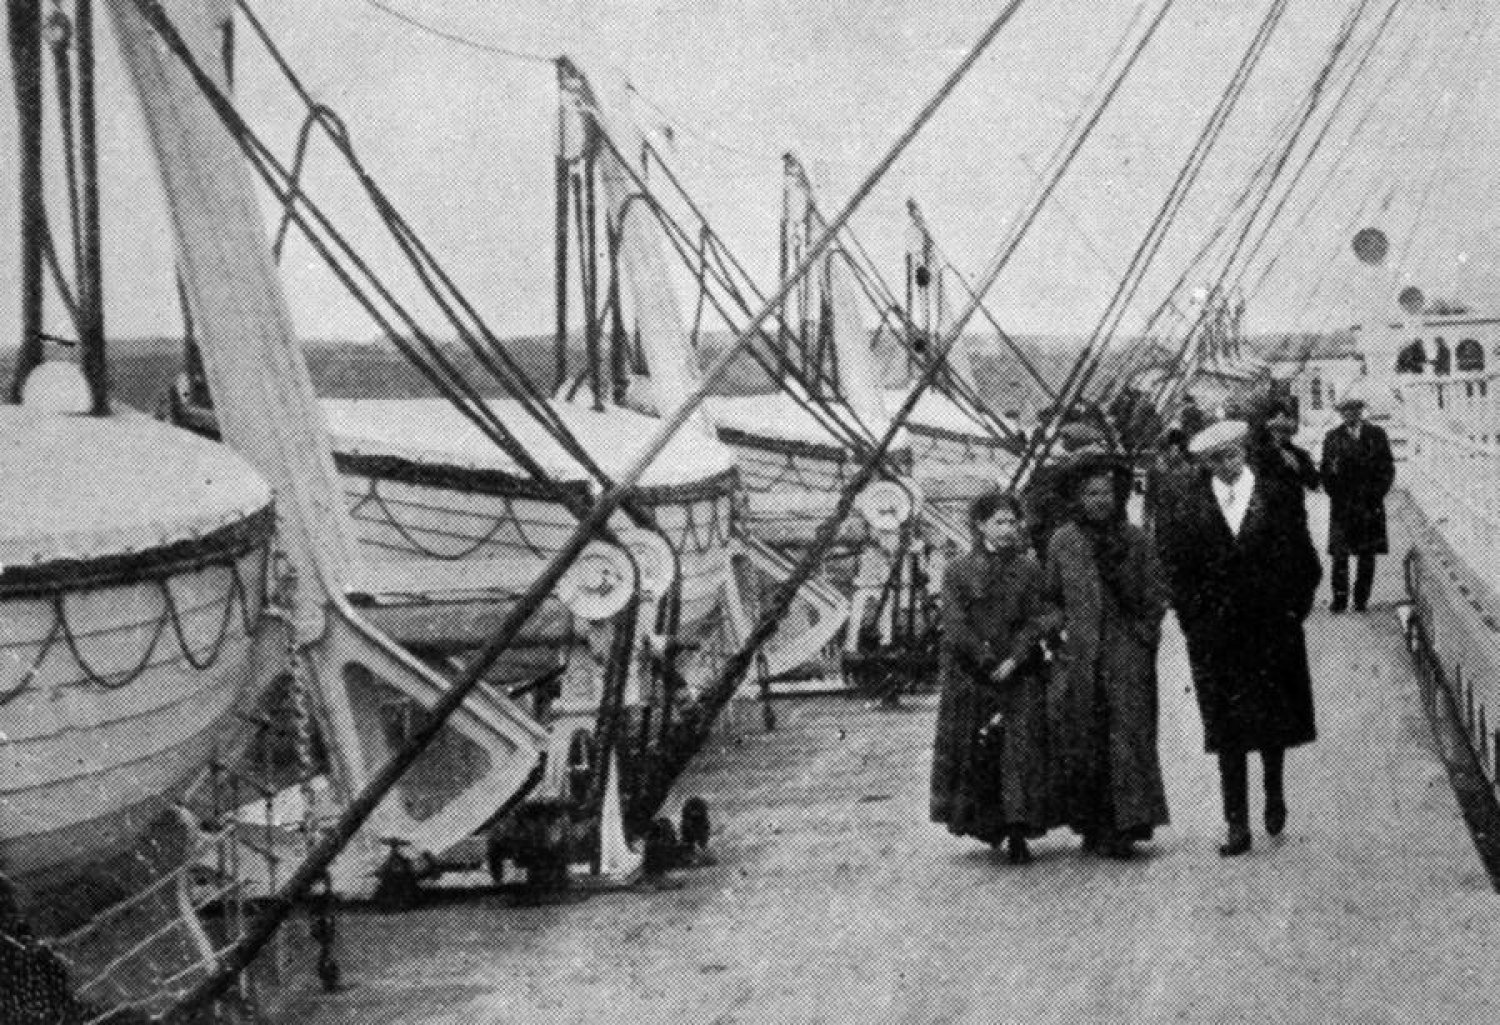 Passengers strolling past the lifeboats on the Promenade deck